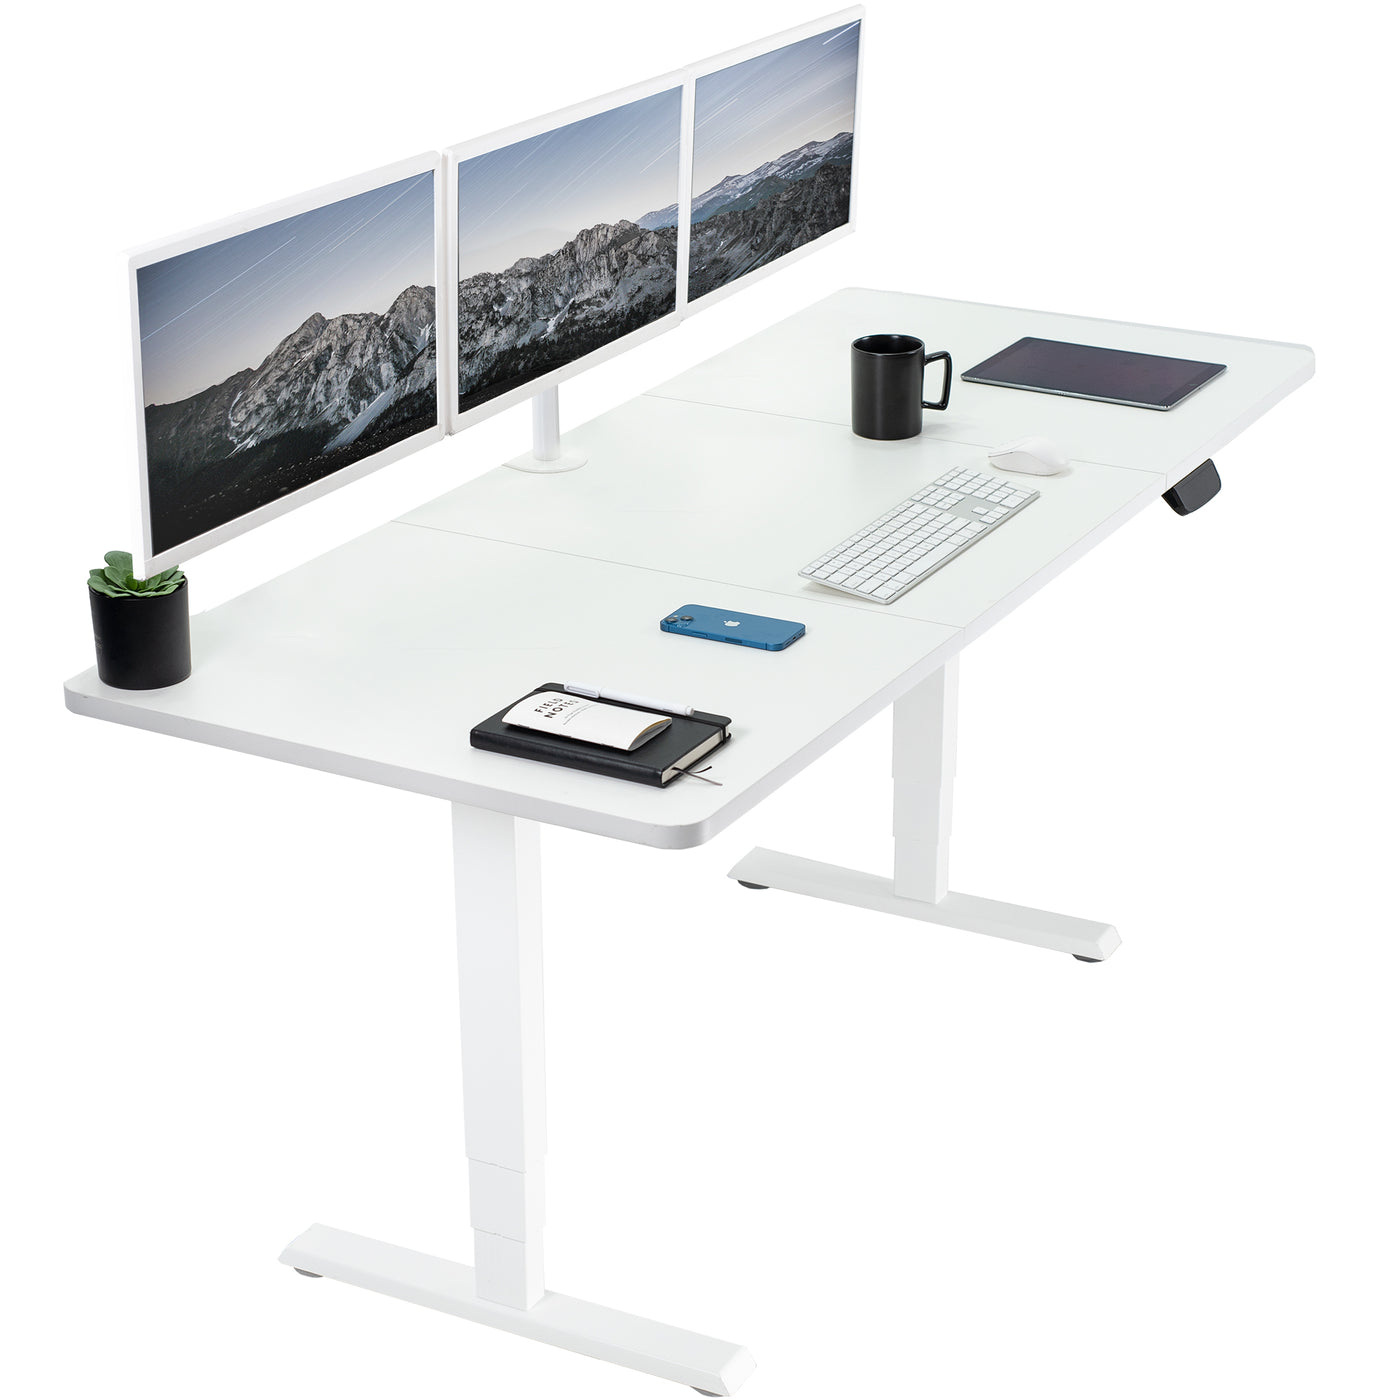 Large sturdy sit or stand active workstation with adjustable height using touch screen control panel.